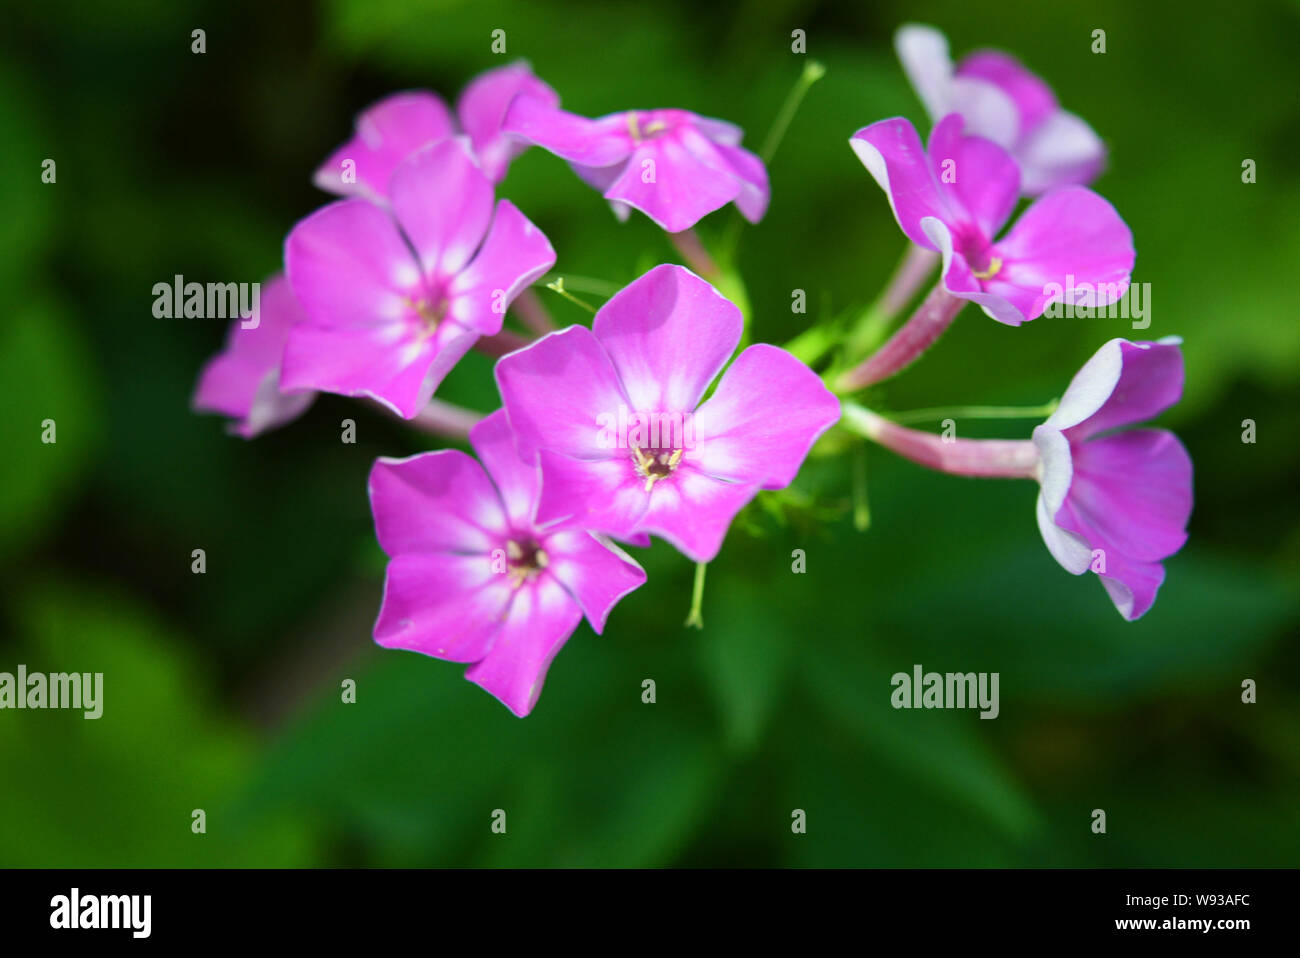 Bright and juicy flowers, bright purple phlox with a white edging on a green leafy background. Stock Photo